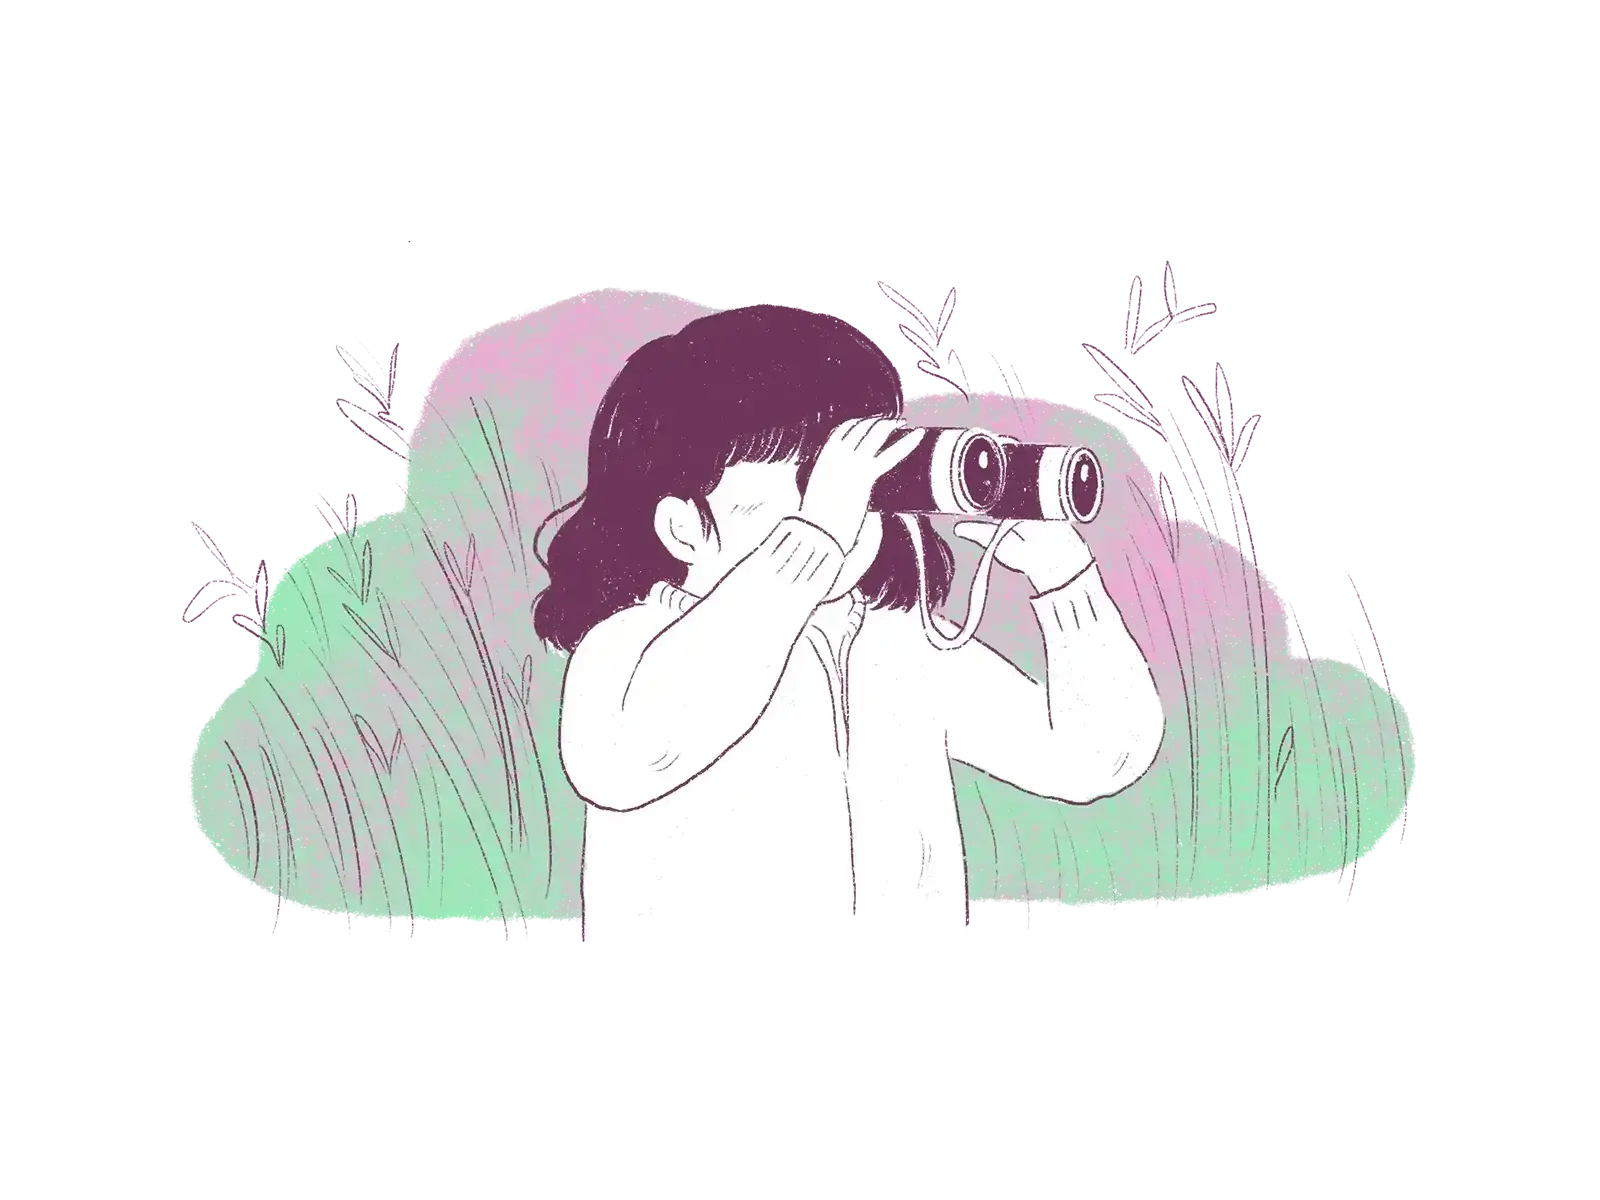 A woman looks through binoculars surrounded by nature